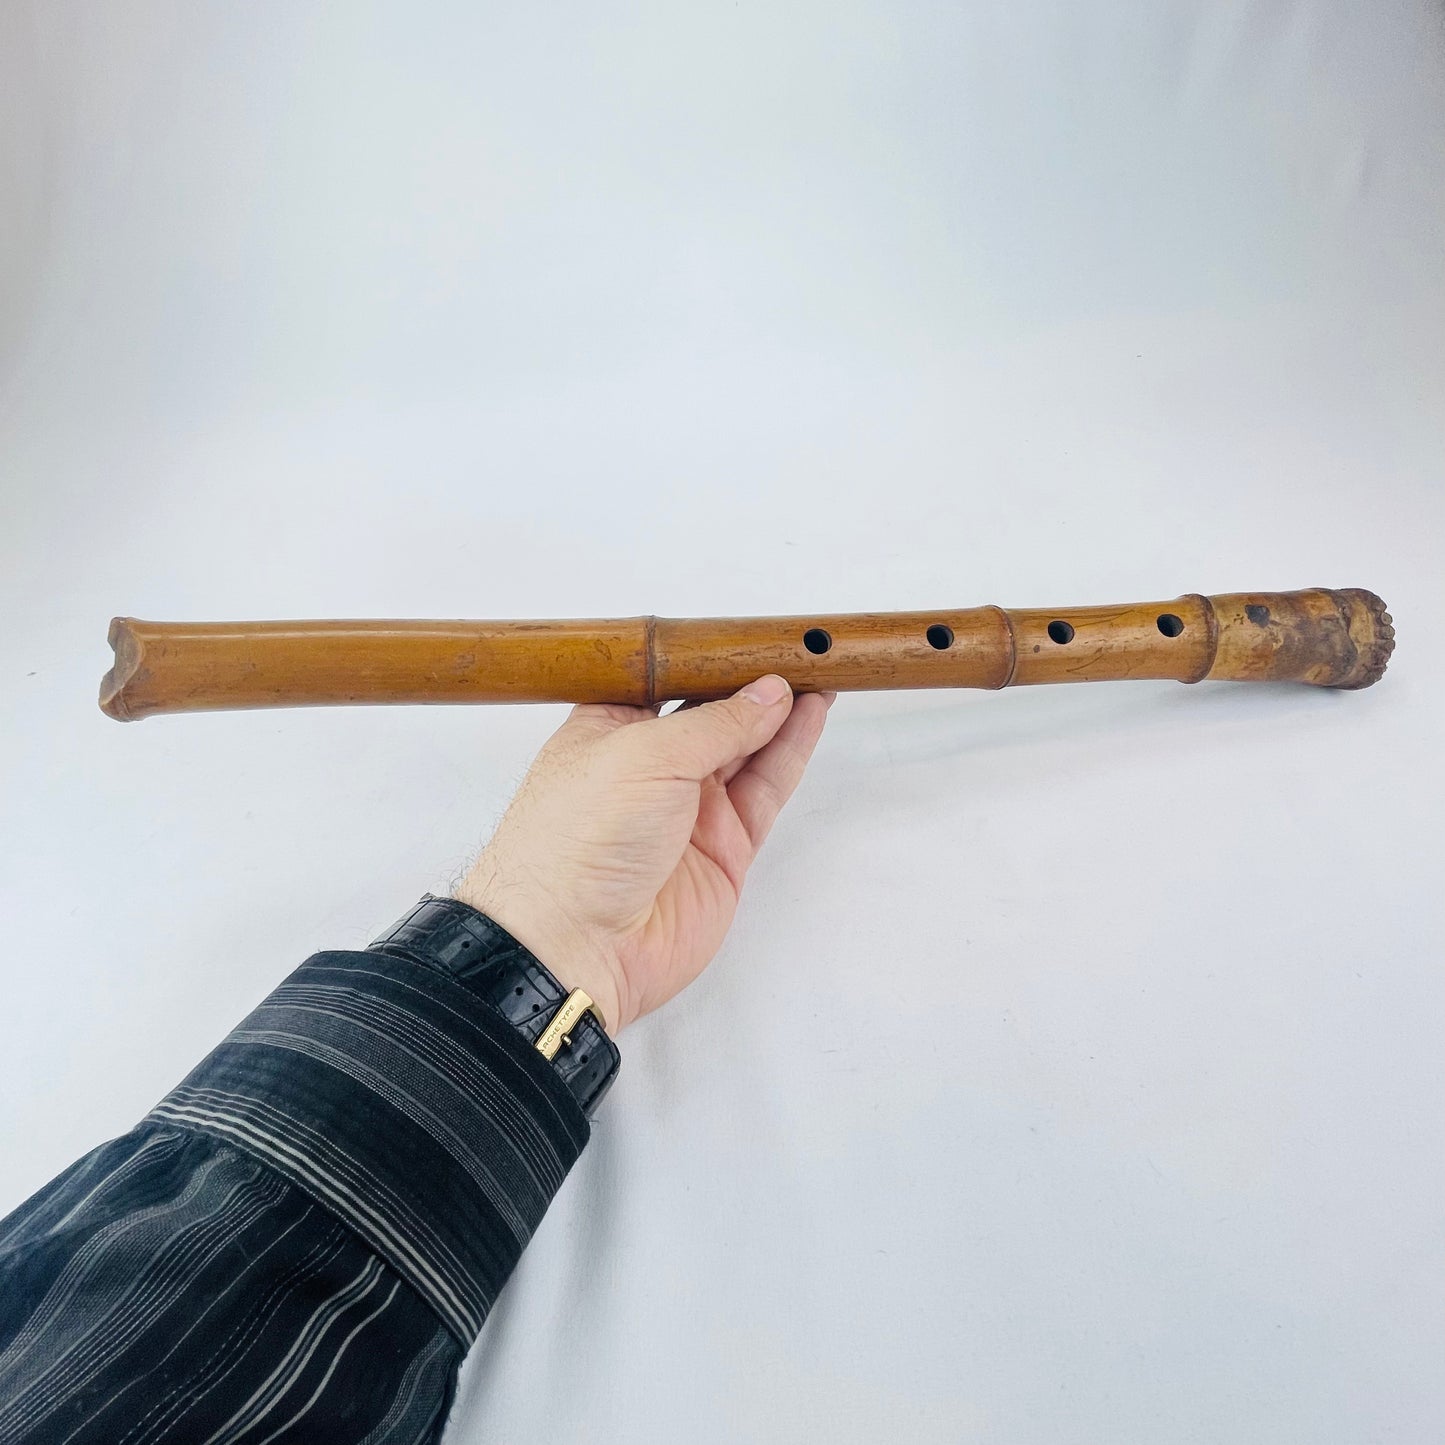 Antique Shakuhatchi Bamboo Flute c.1920 in Playable Condition